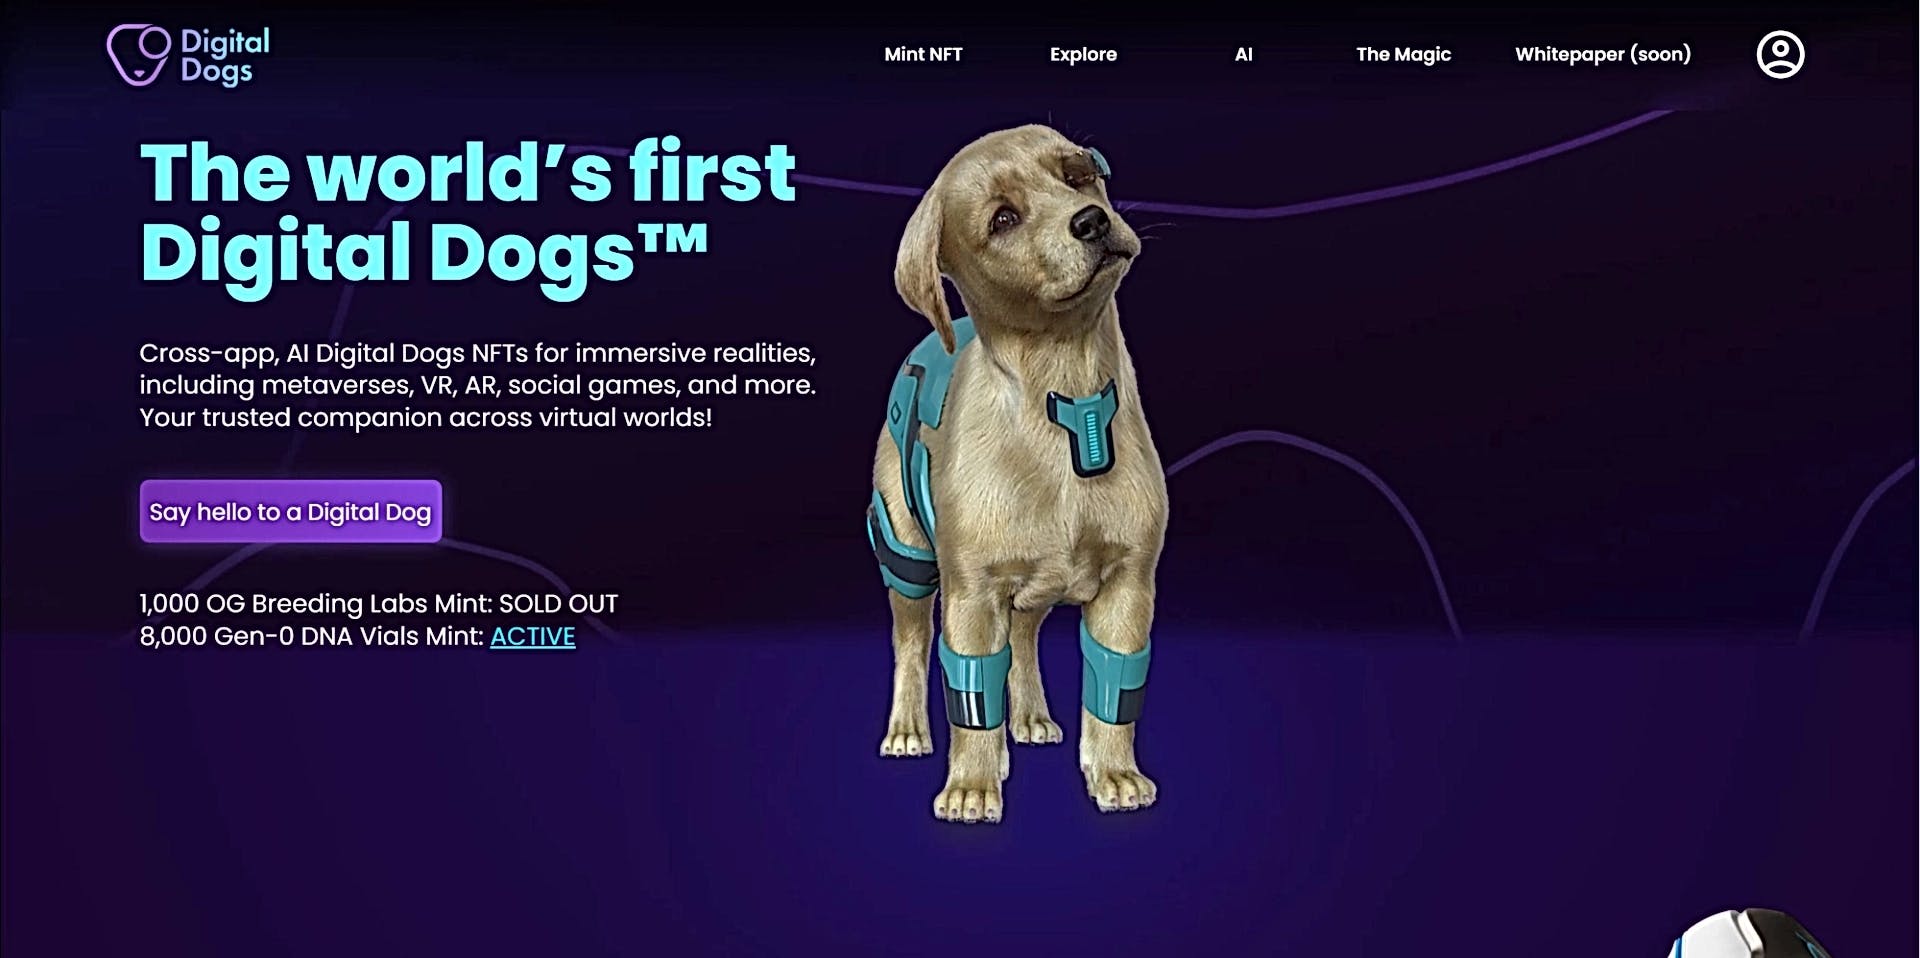 Digital Dogs featured